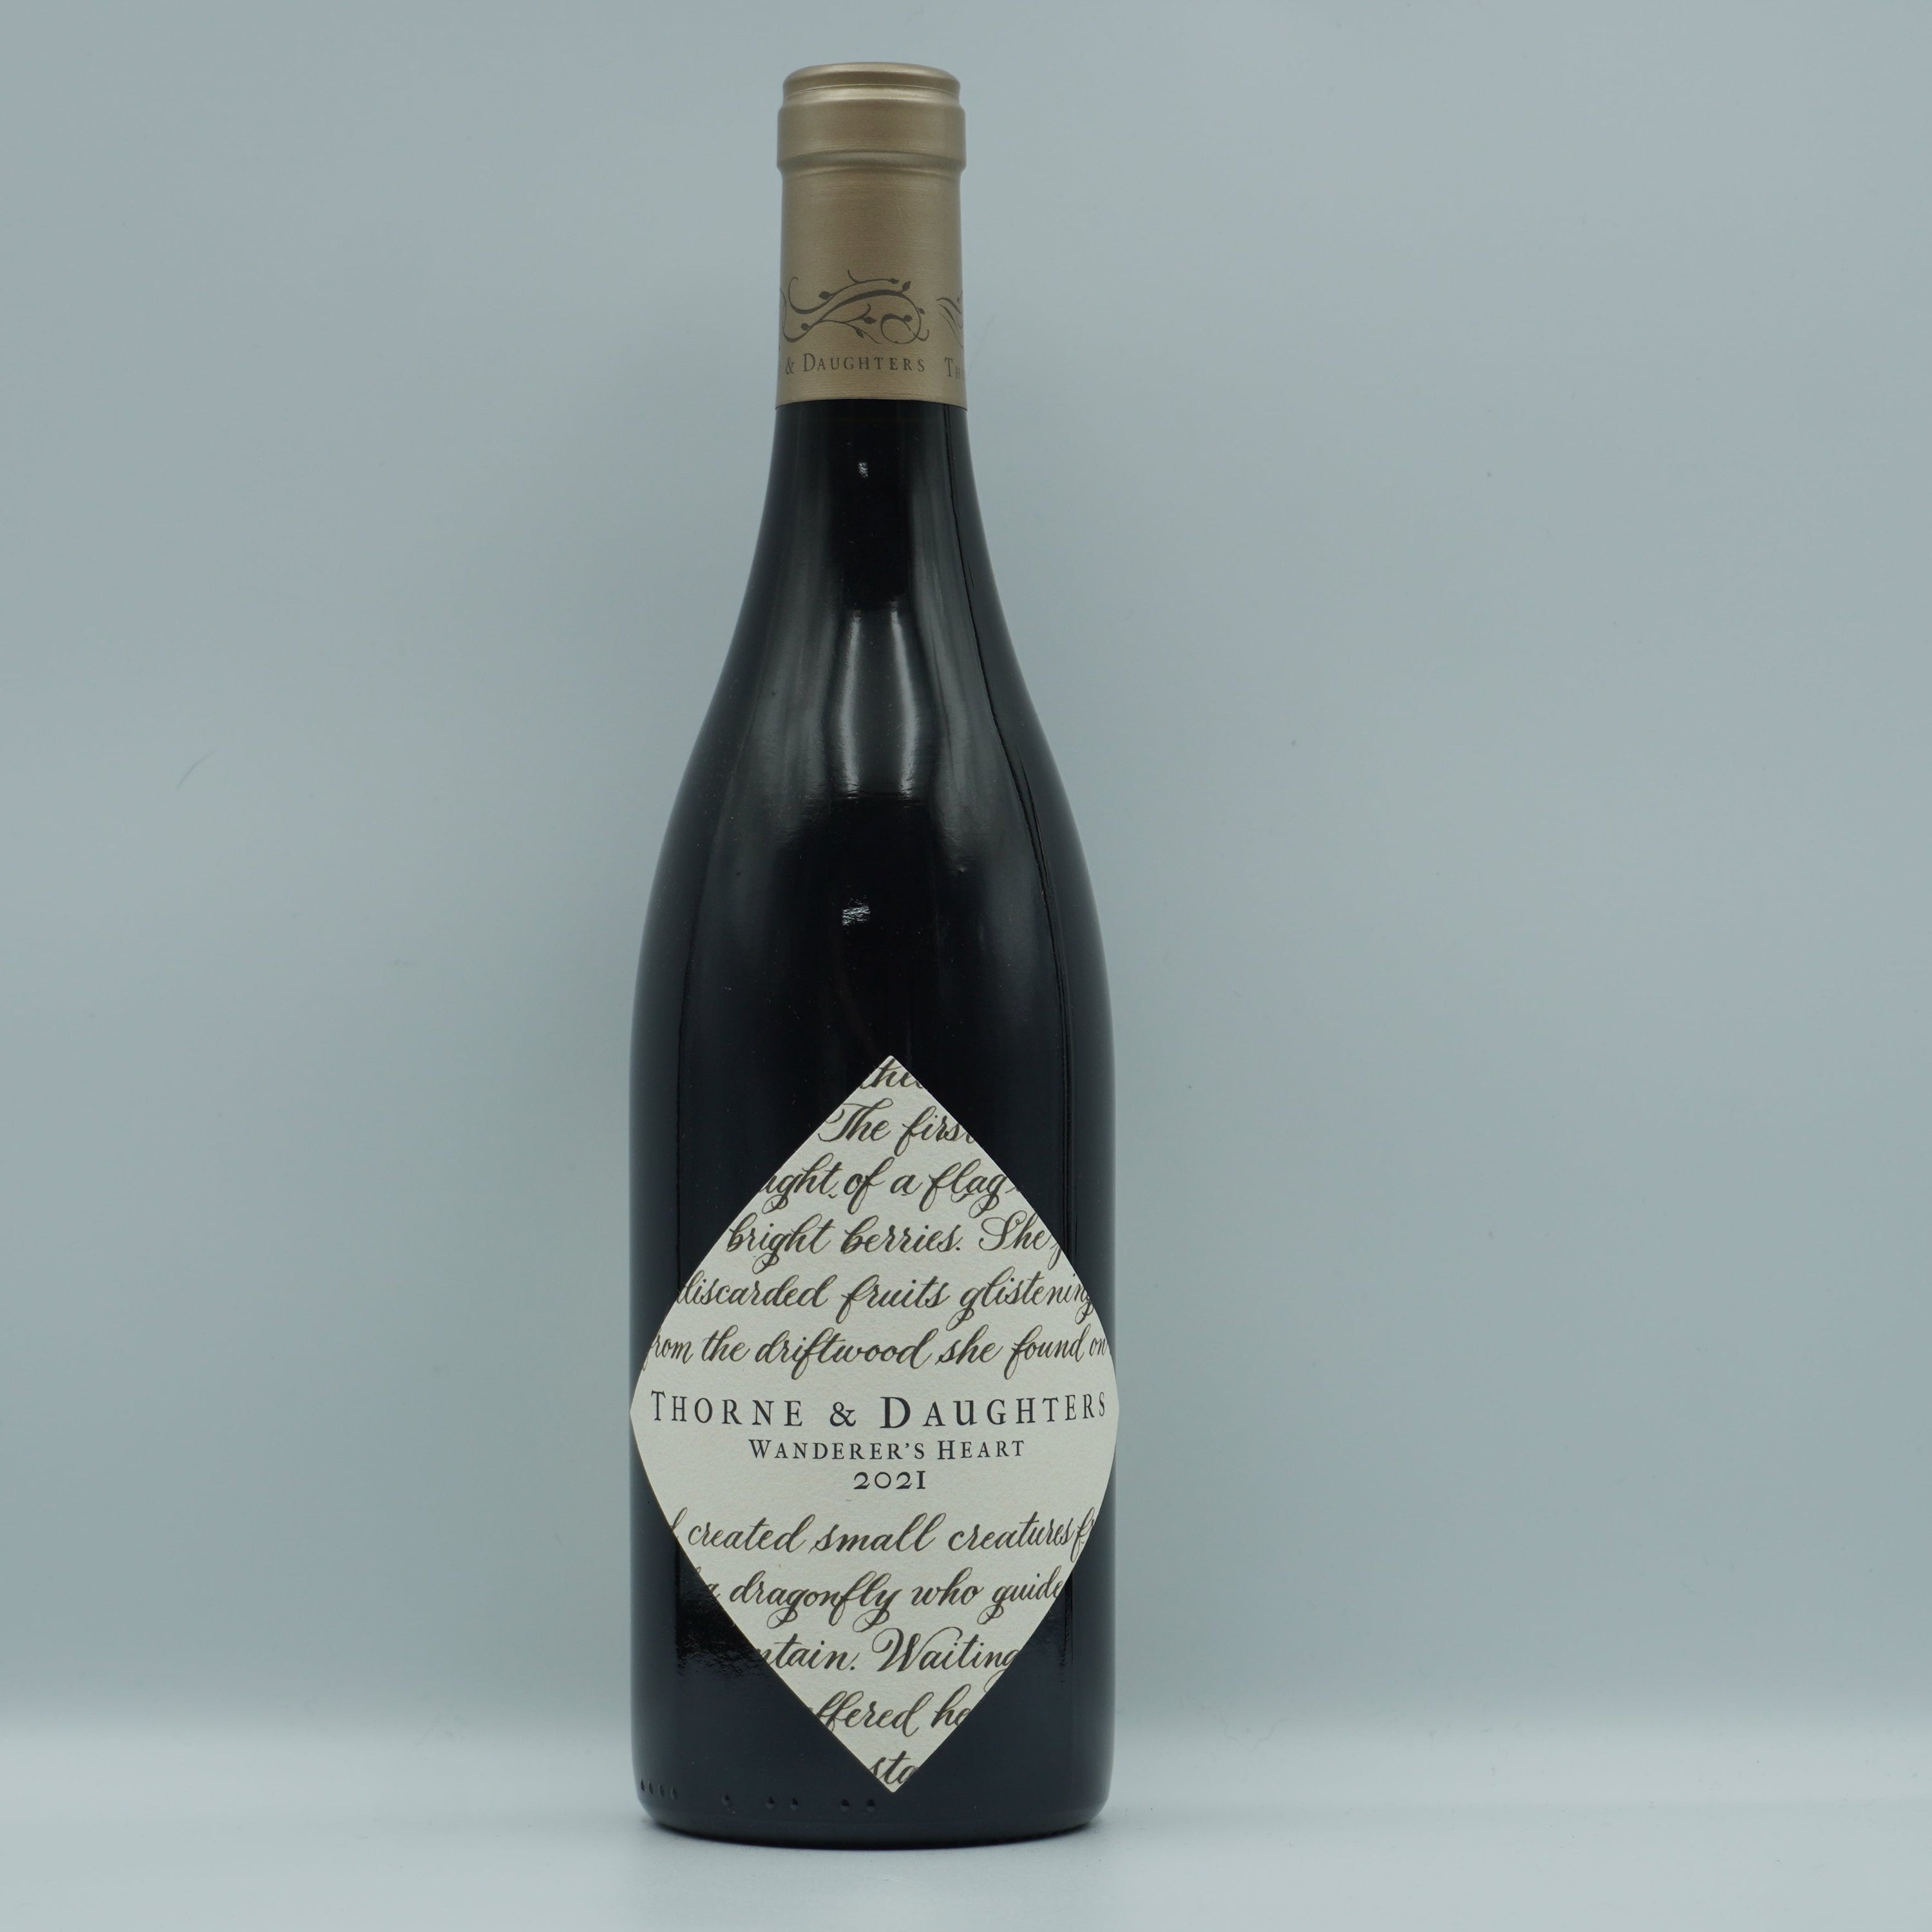 Thorne & Daughters, 'Wanderer's Heart' Red Blend 2020